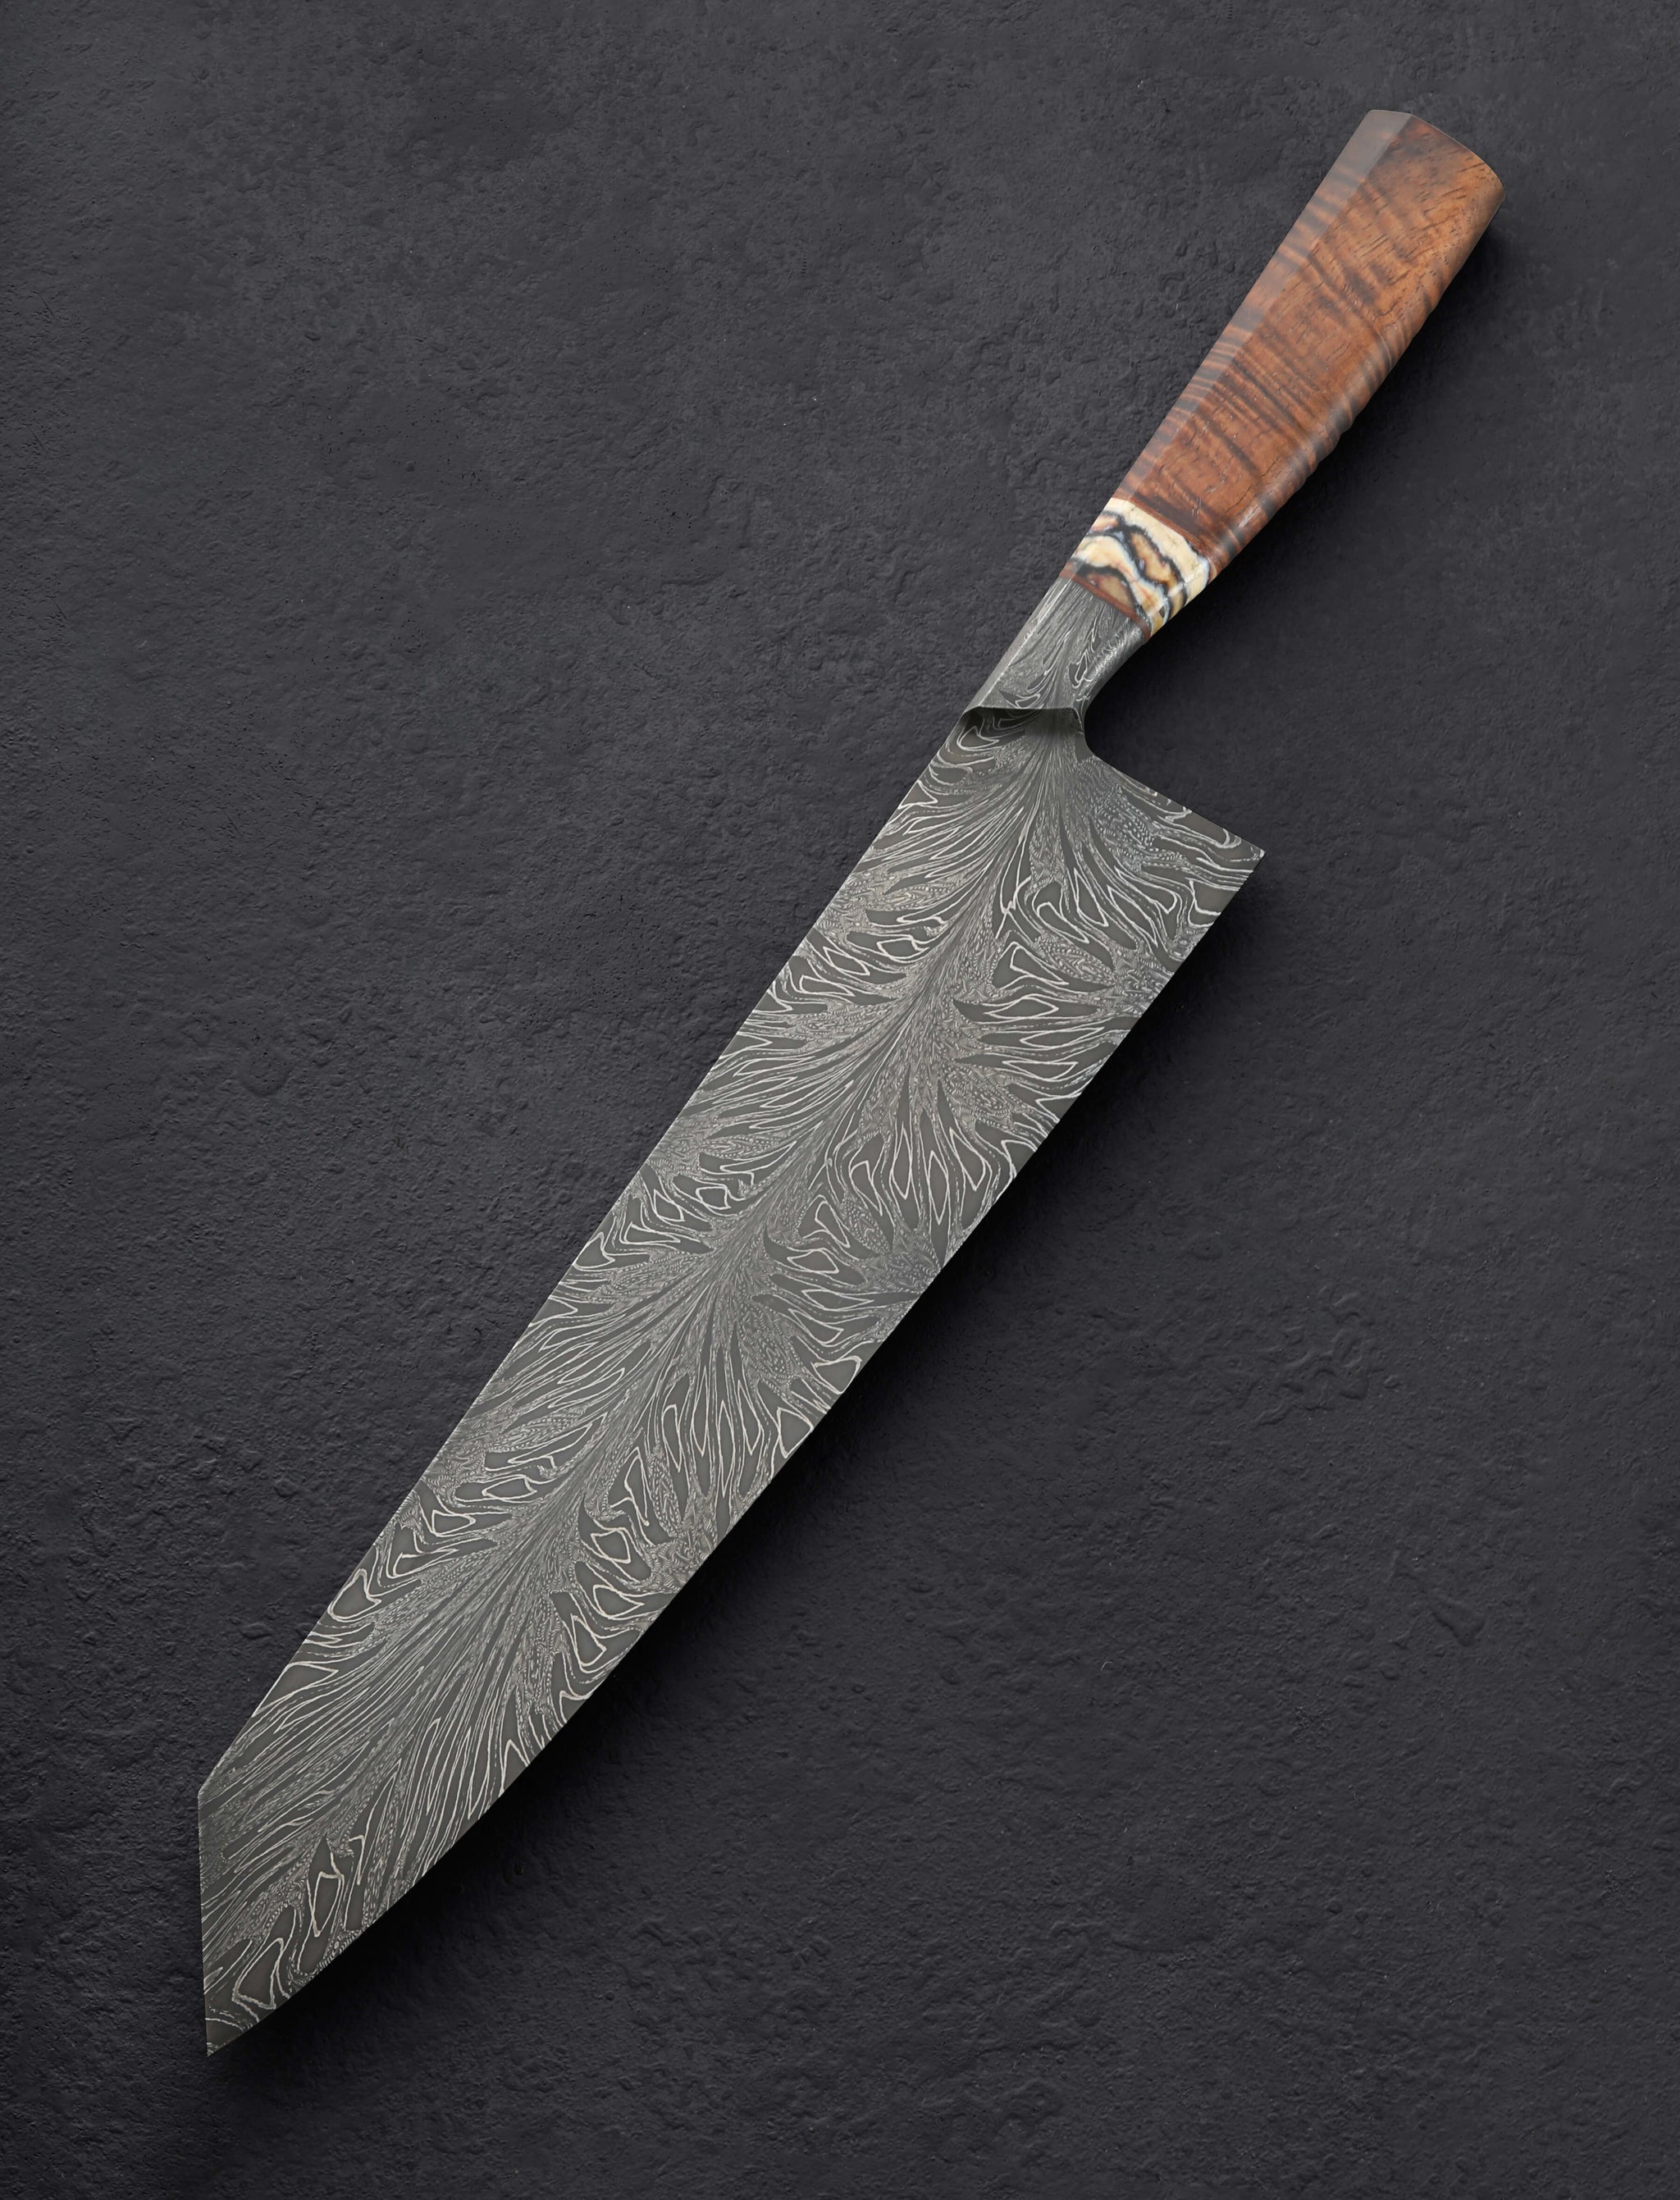 Casey Vilensky - Vancouver Chef & Gyuto Feather on Fire Gyuto 315mm